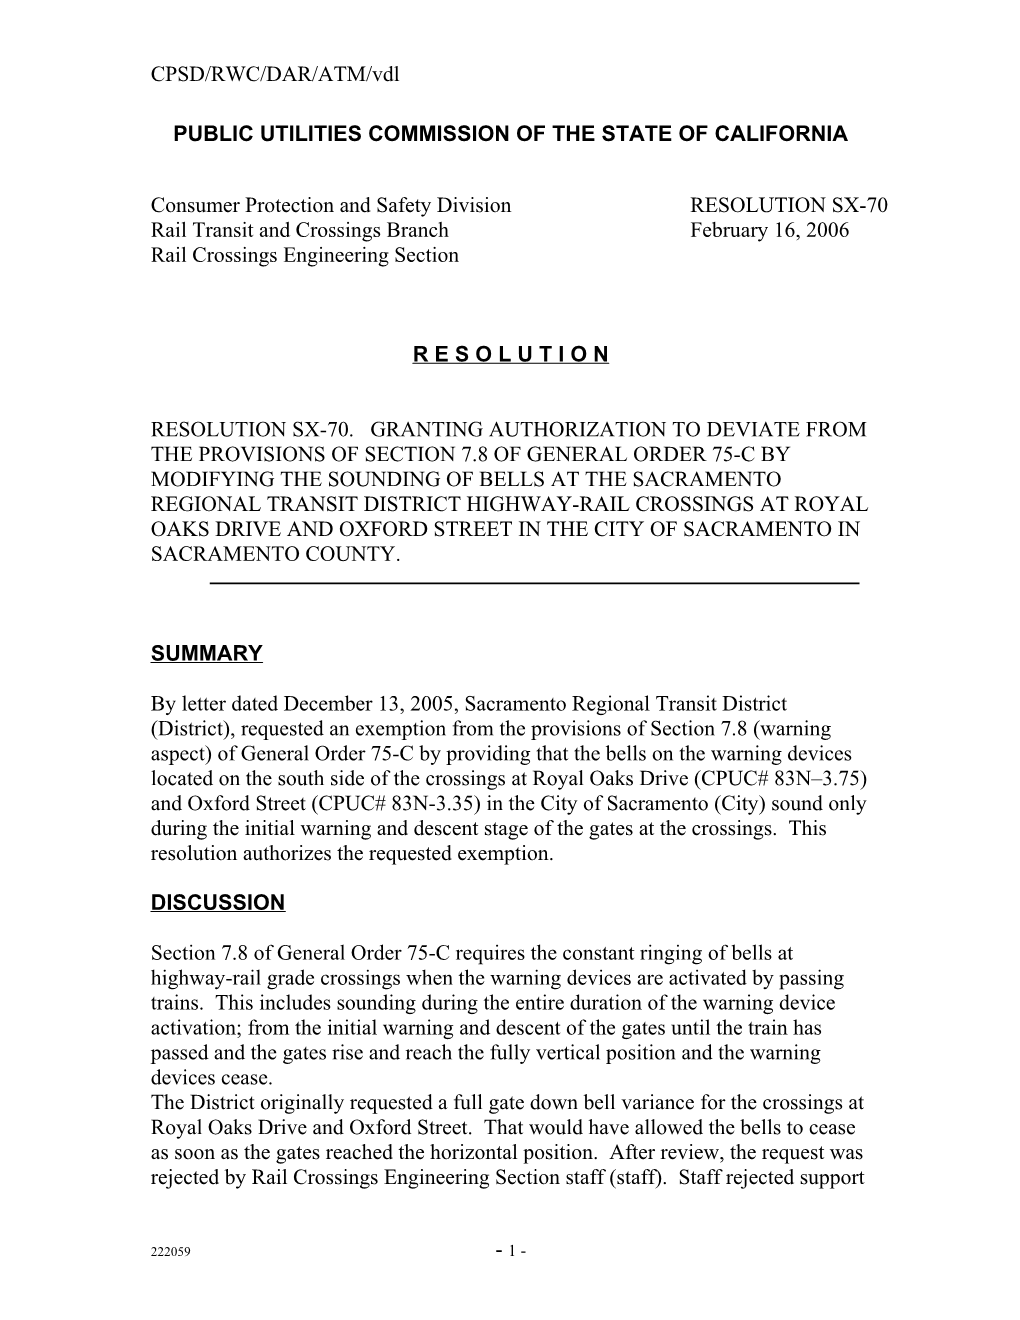 Public Utilities Commission of the State of California s123